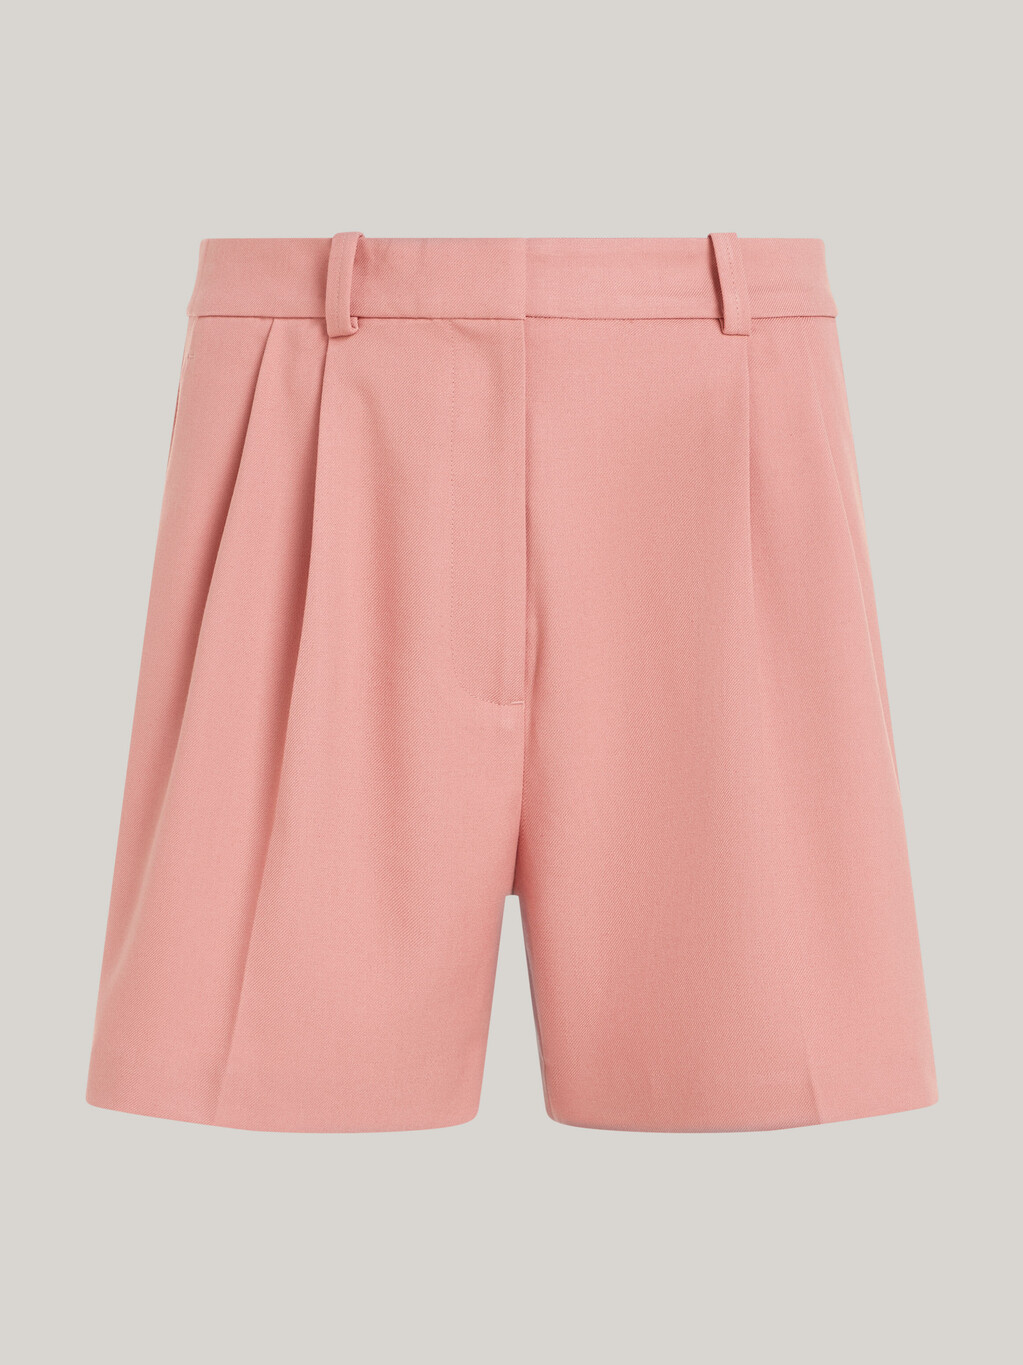 TH Monogram Pleated Mid Rise Chino Shorts, Teaberry Blossom, hi-res